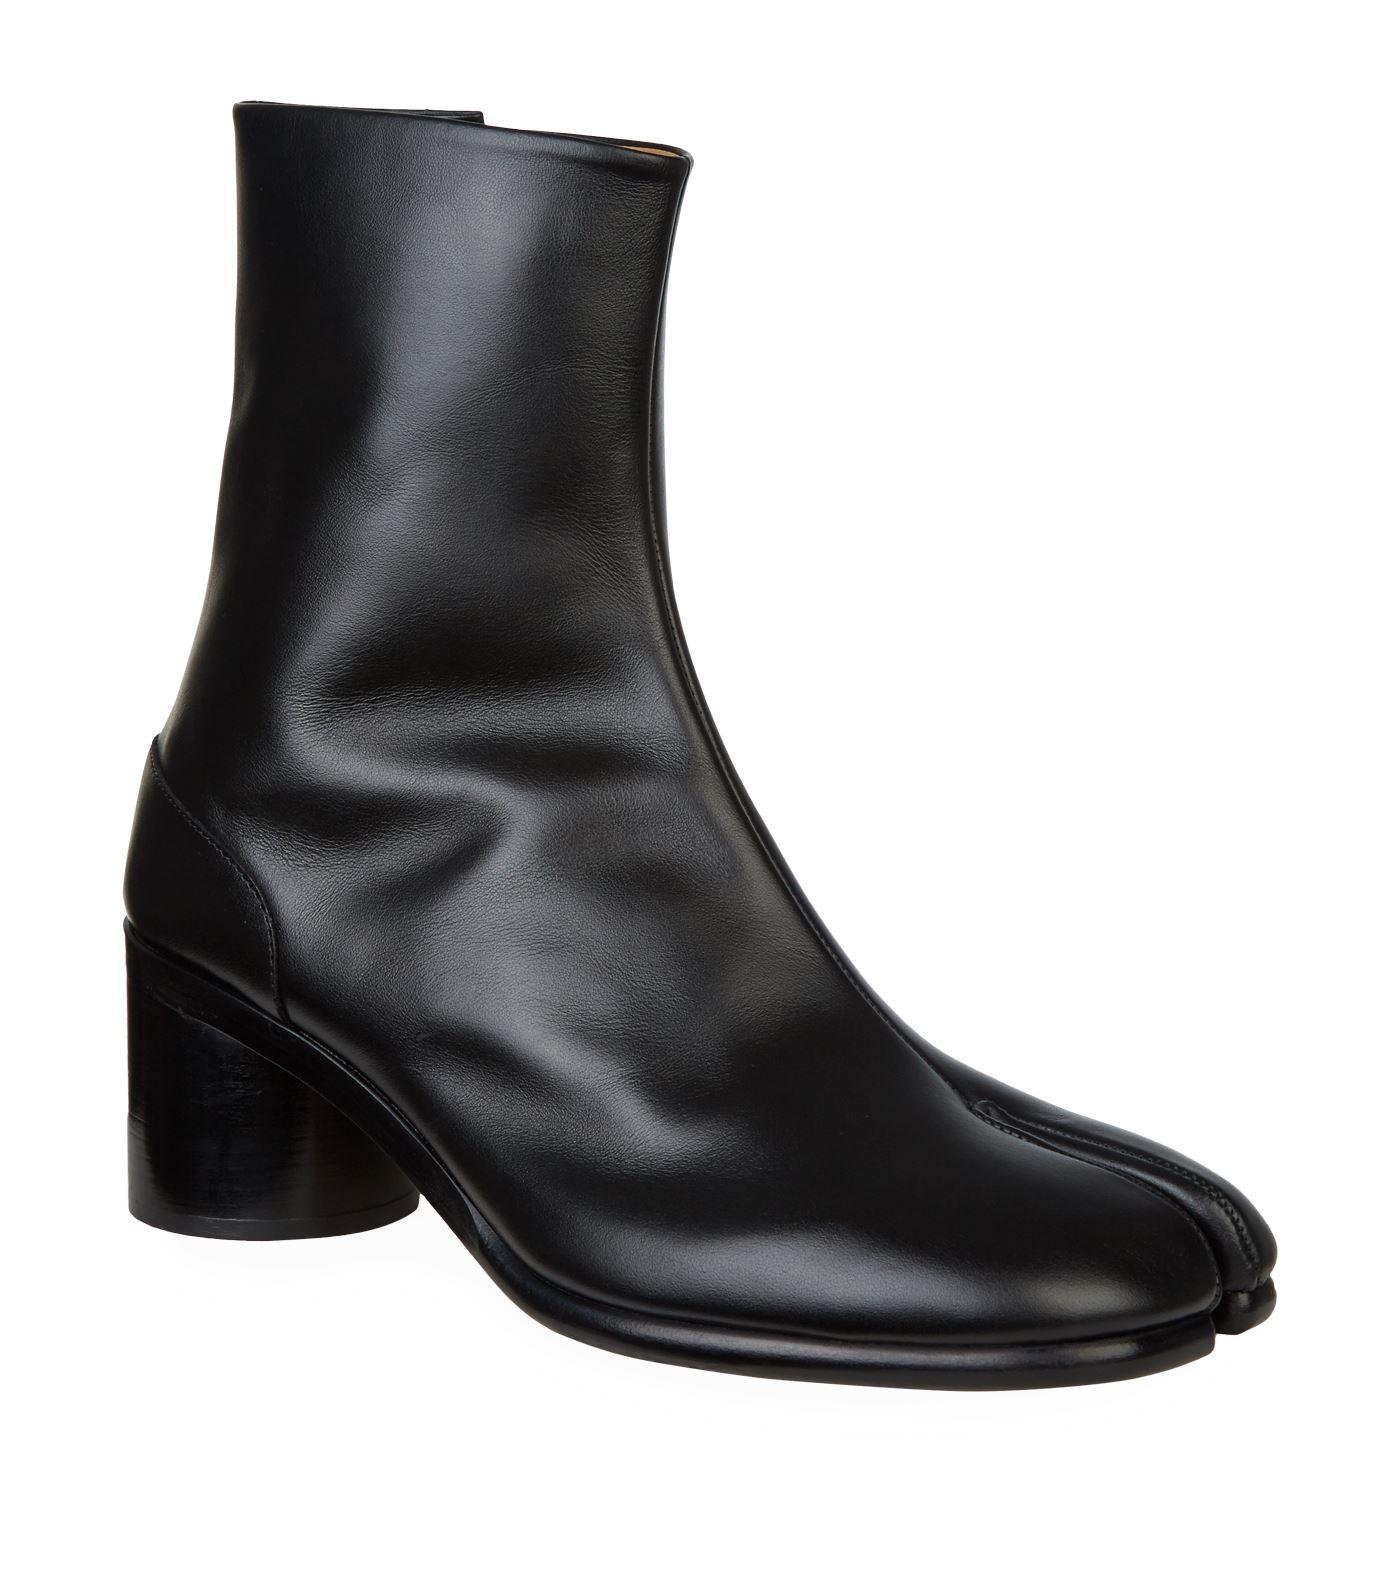 Lyst - Maison Margiela Tabi Ankle Boots in Black for Men - Save 21. ...